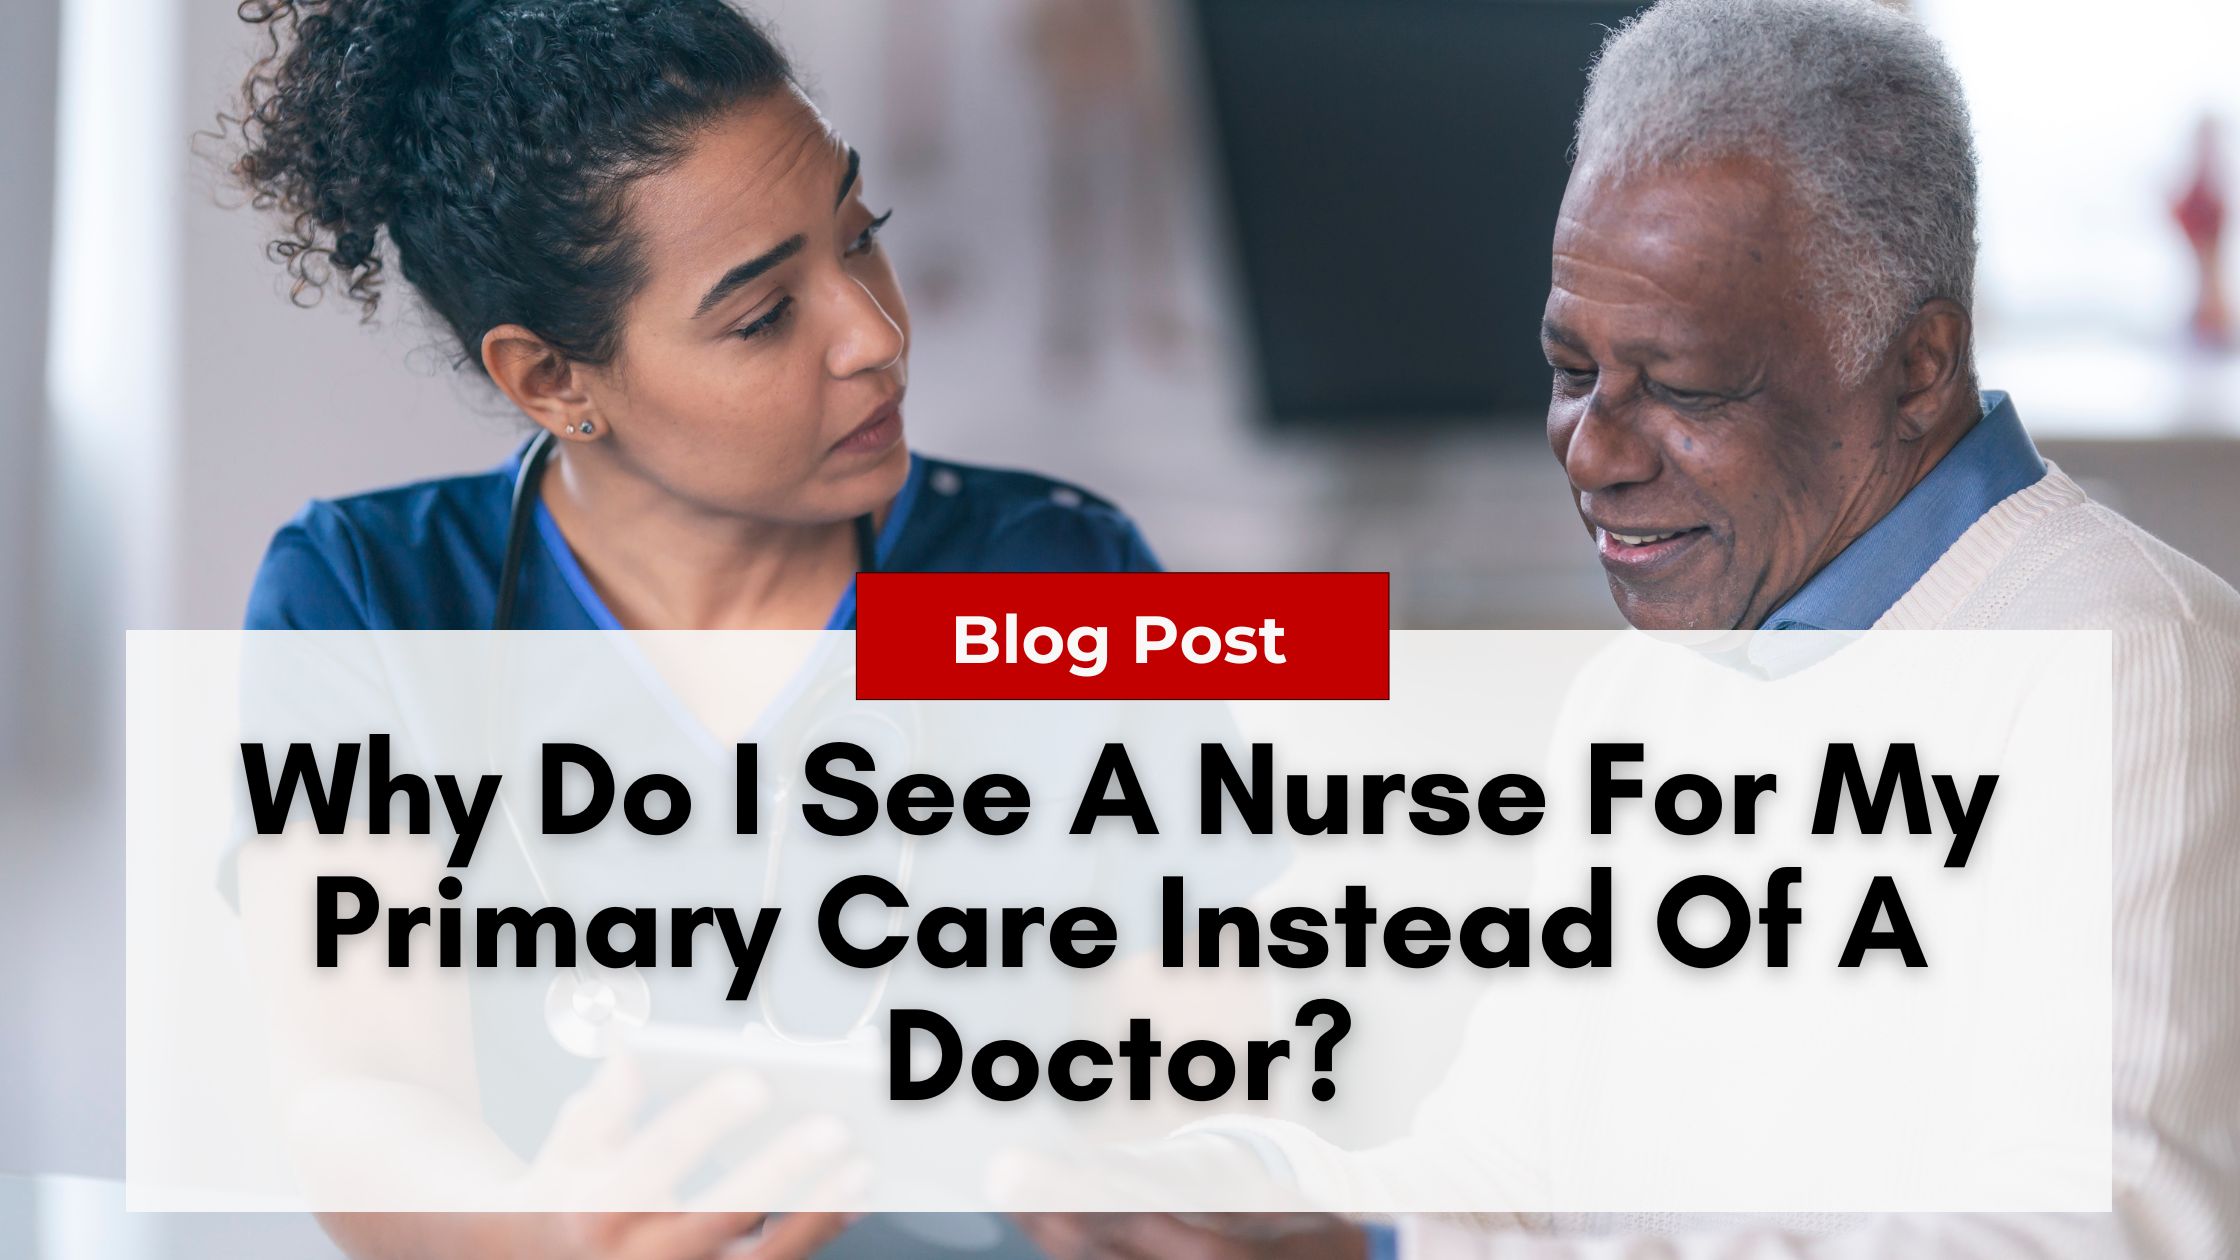 A nurse and an older man are engaged in conversation. Text overlay reads, "Blog Post: Why Do I See A Nurse Practitioner For My Primary Care Instead Of A Doctor?